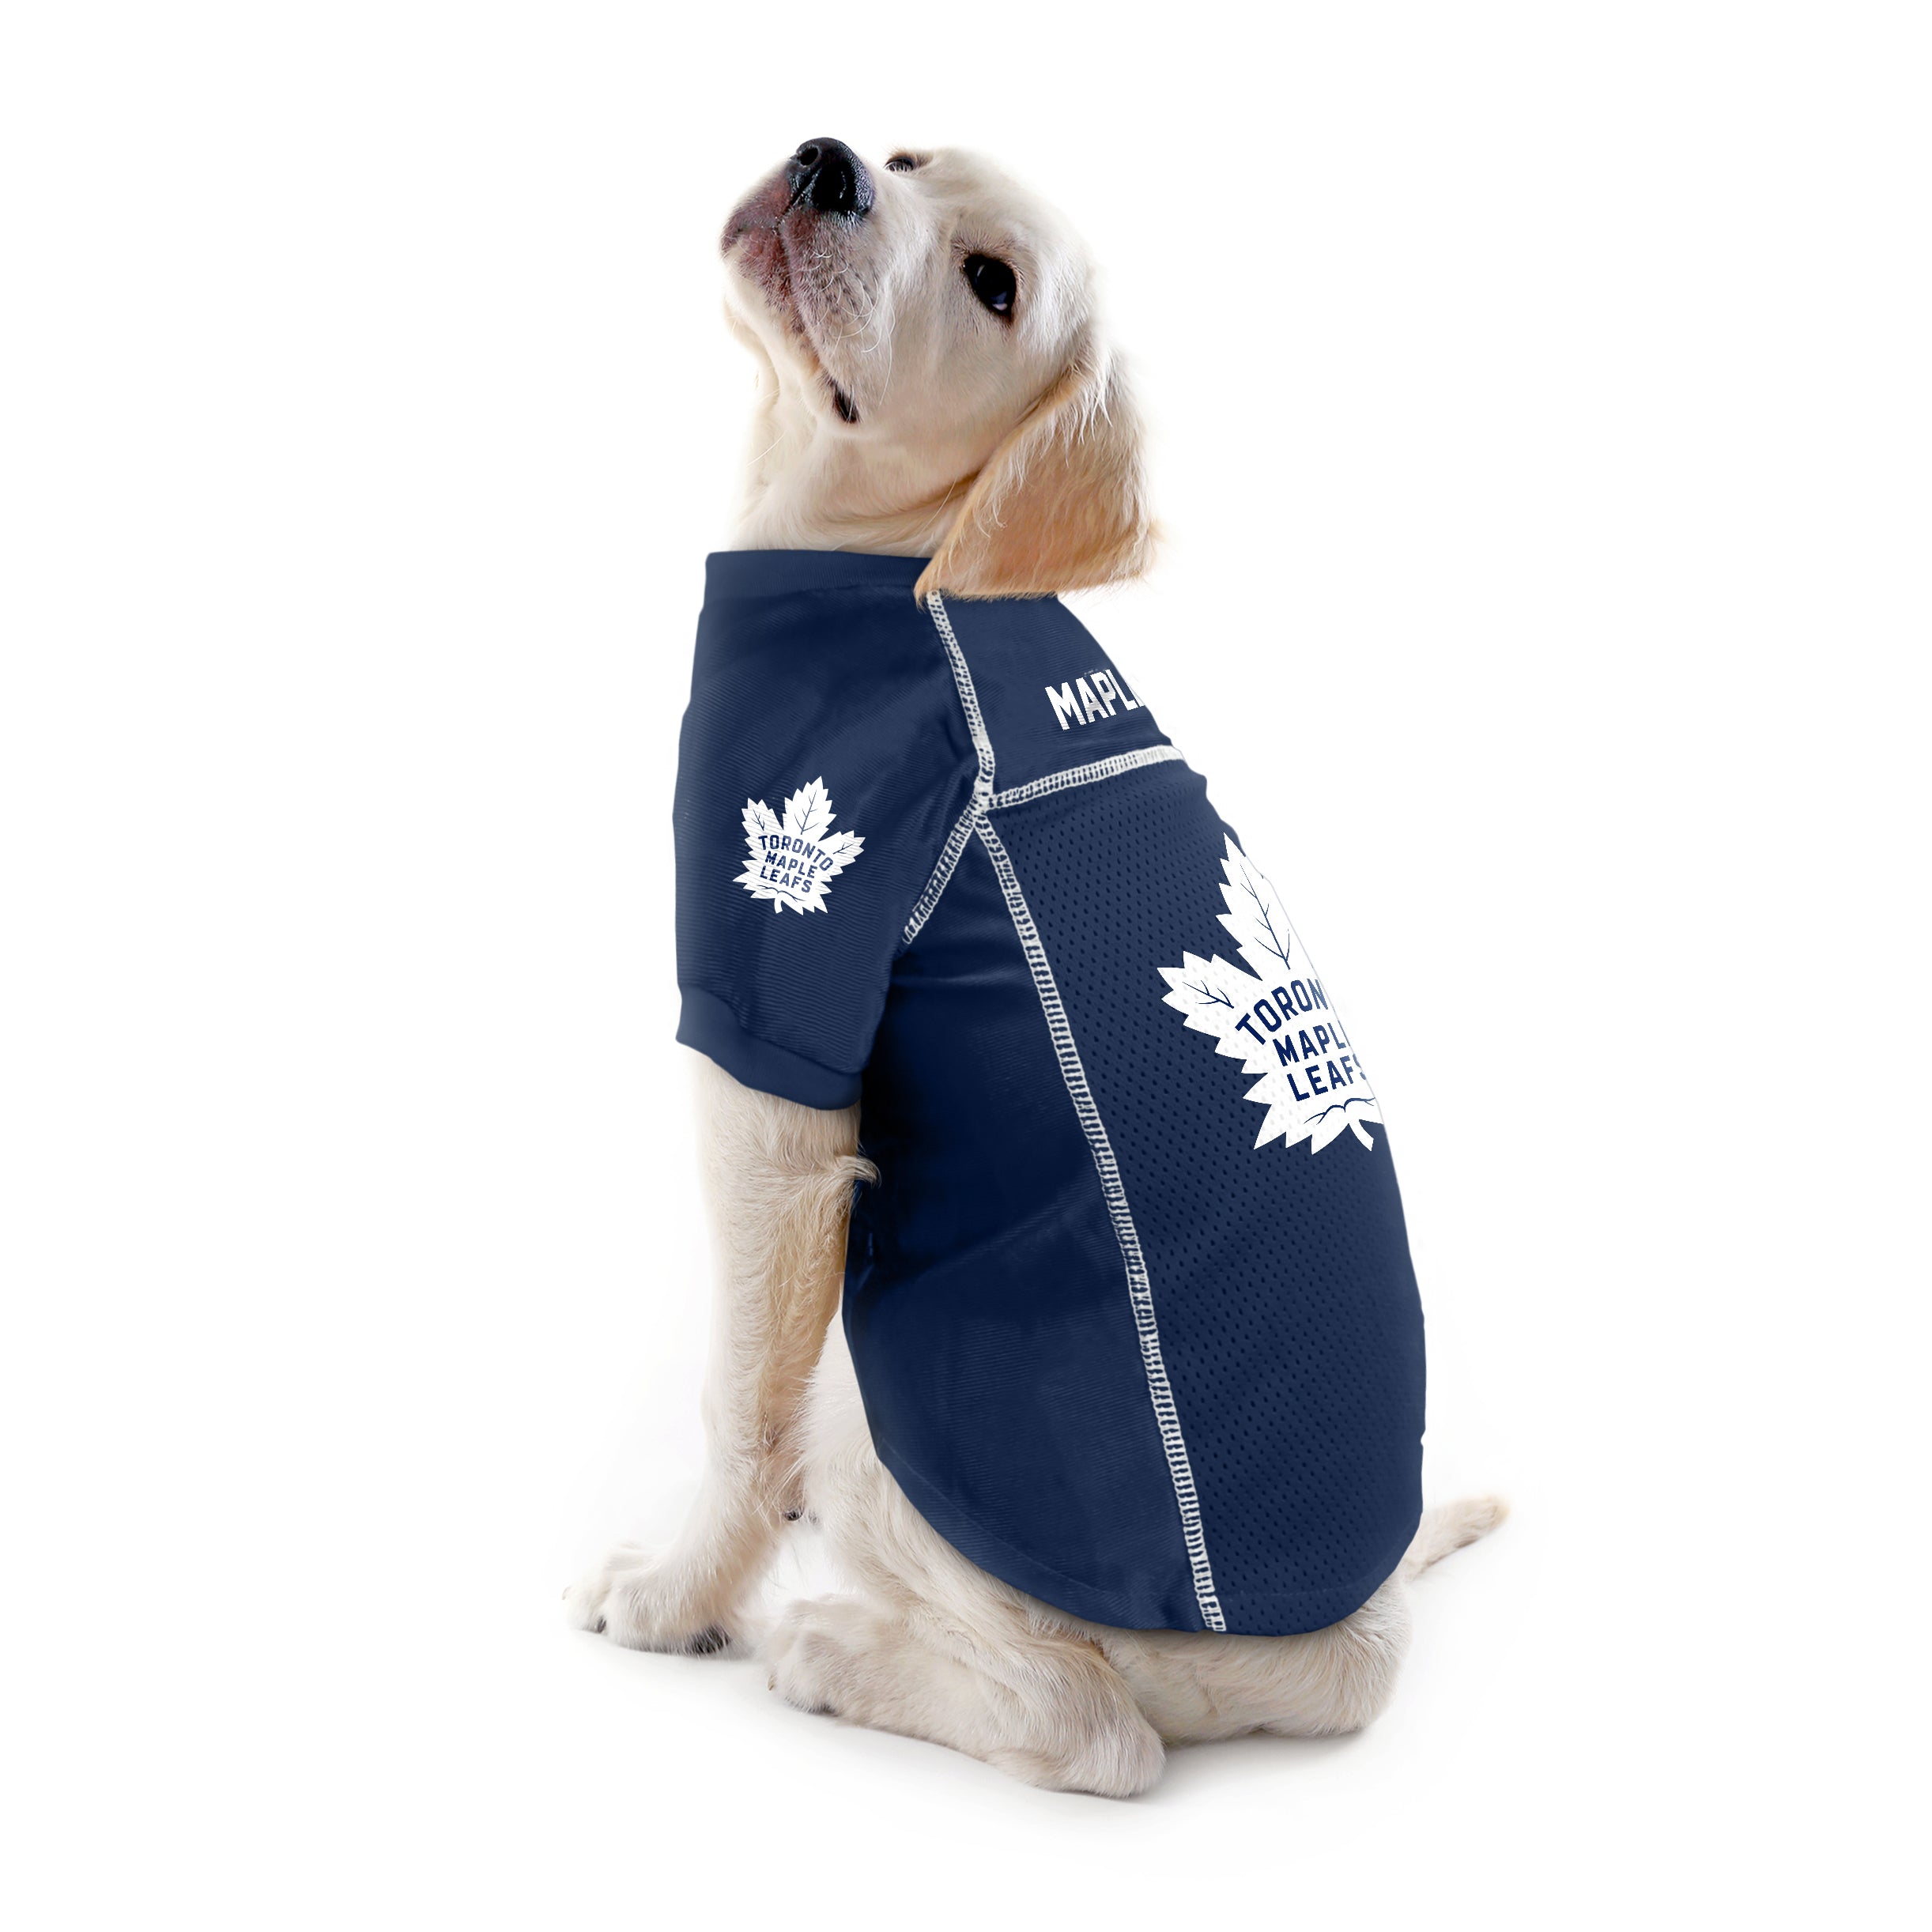  Pets First NHL Toronto Maple Leafs Tee Shirt for Dogs & Cats,  Large. - are You A Hockey Fan? Let Your Pet Be an NHL Fan Too! : Pet  Supplies